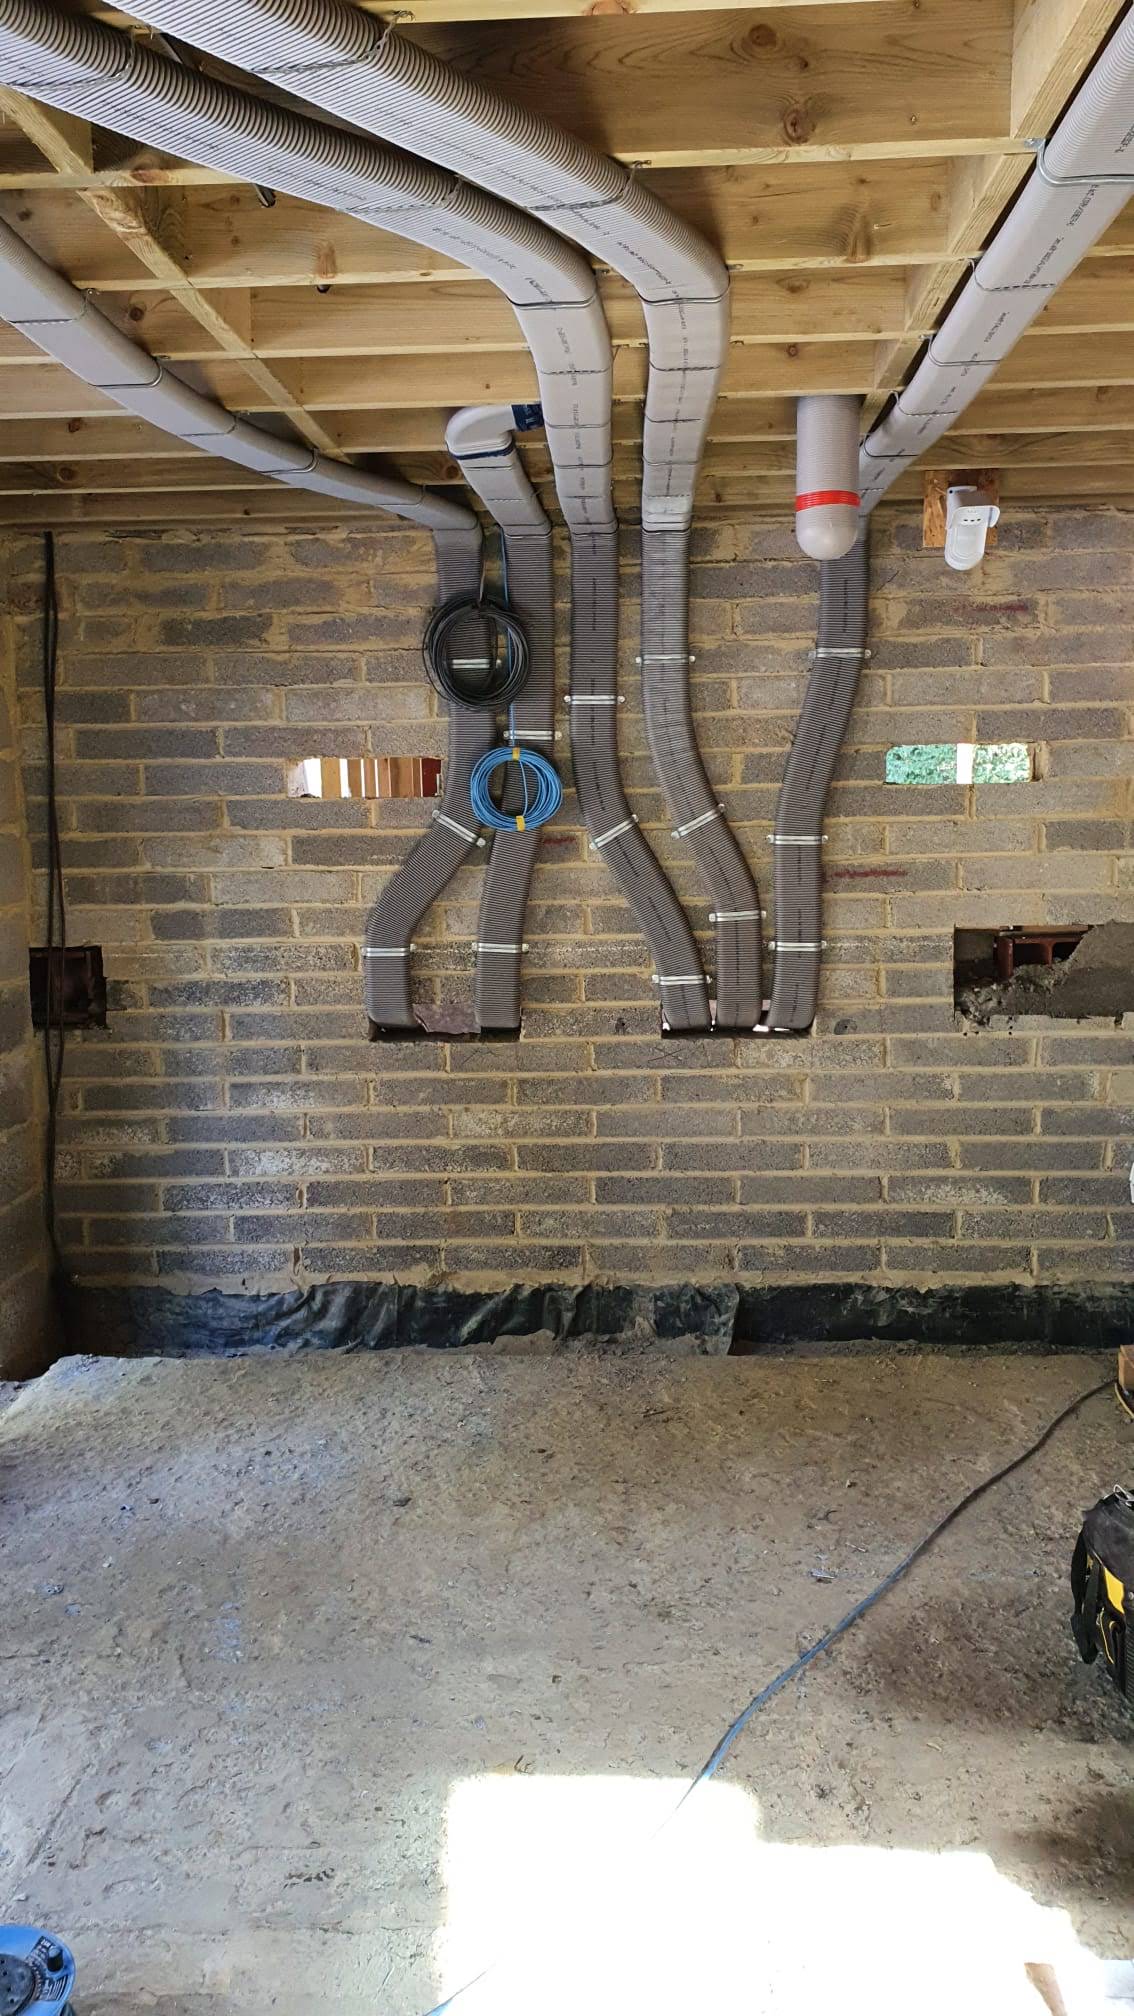 Flat 51mm ducting pinned to wall and rising into ceiling area